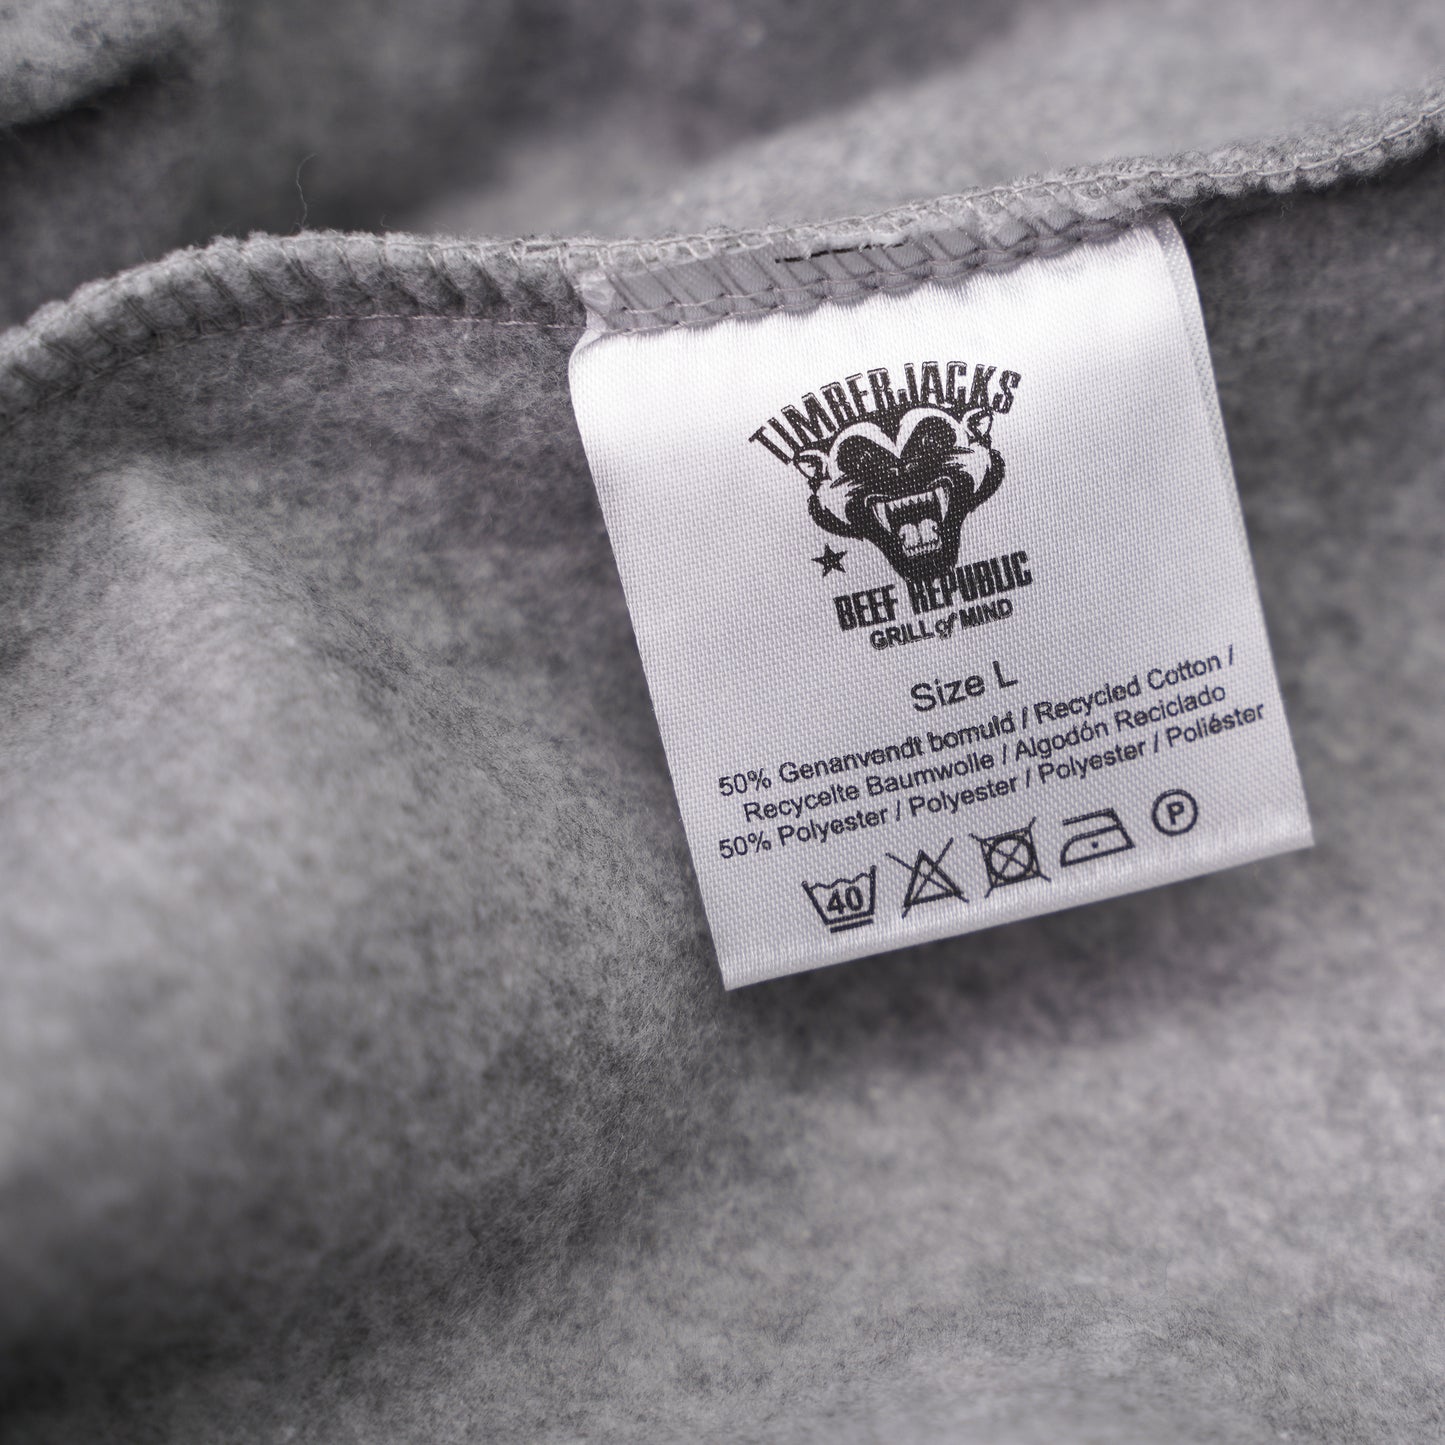 Hoodie Badger Ash Grey Recycled Cotton